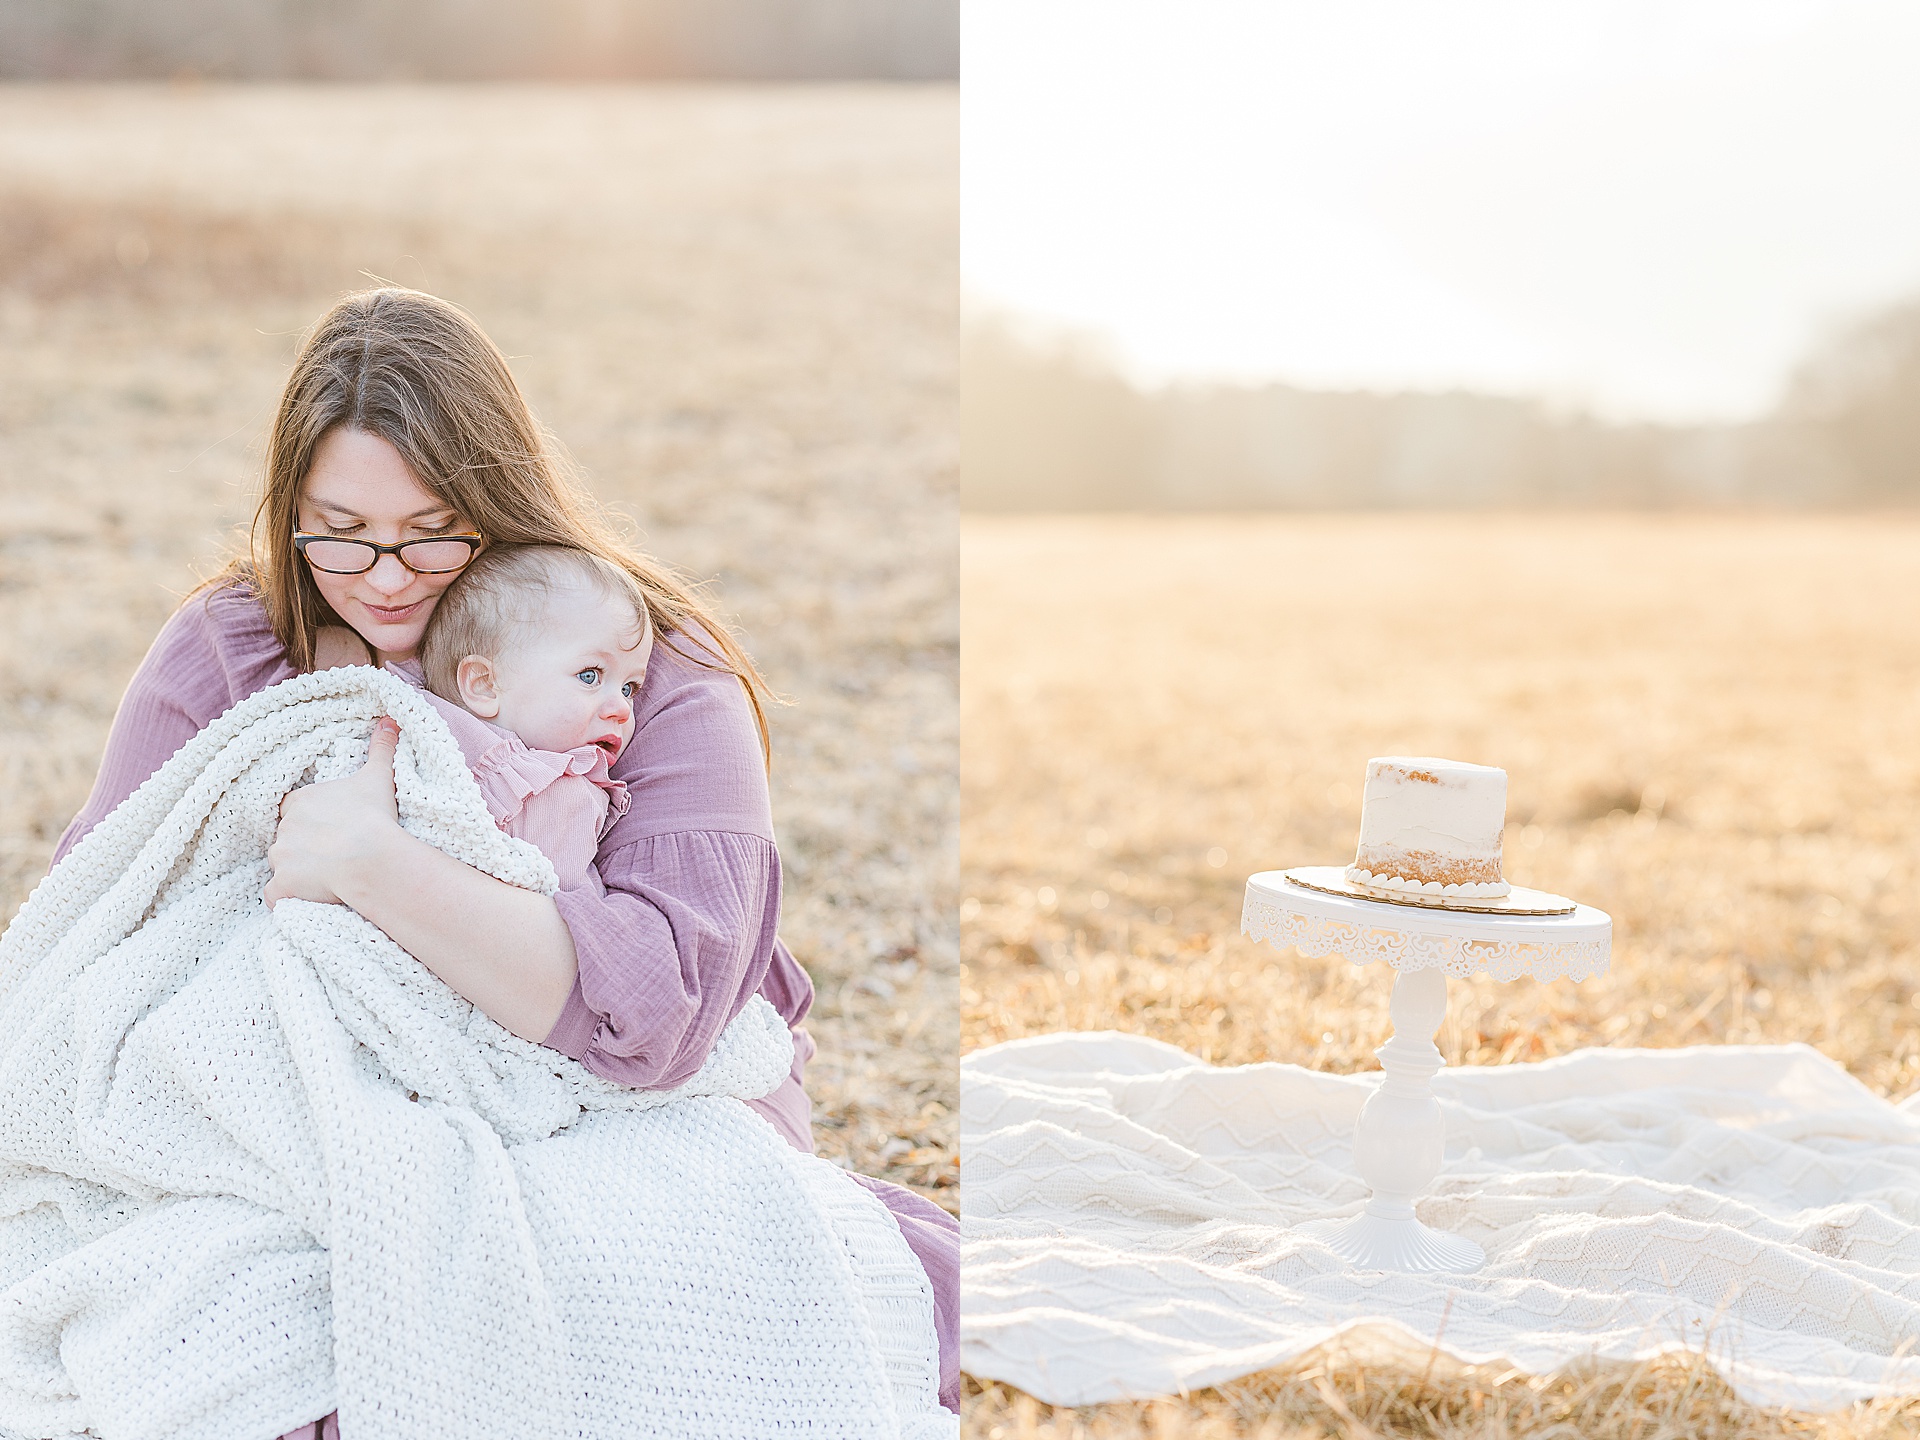 Mom snuggles baby and cake on stand in field during first birthday cake smash photo session with Sara Sniderman Photography at Cow Common, Wayland Massachusetts